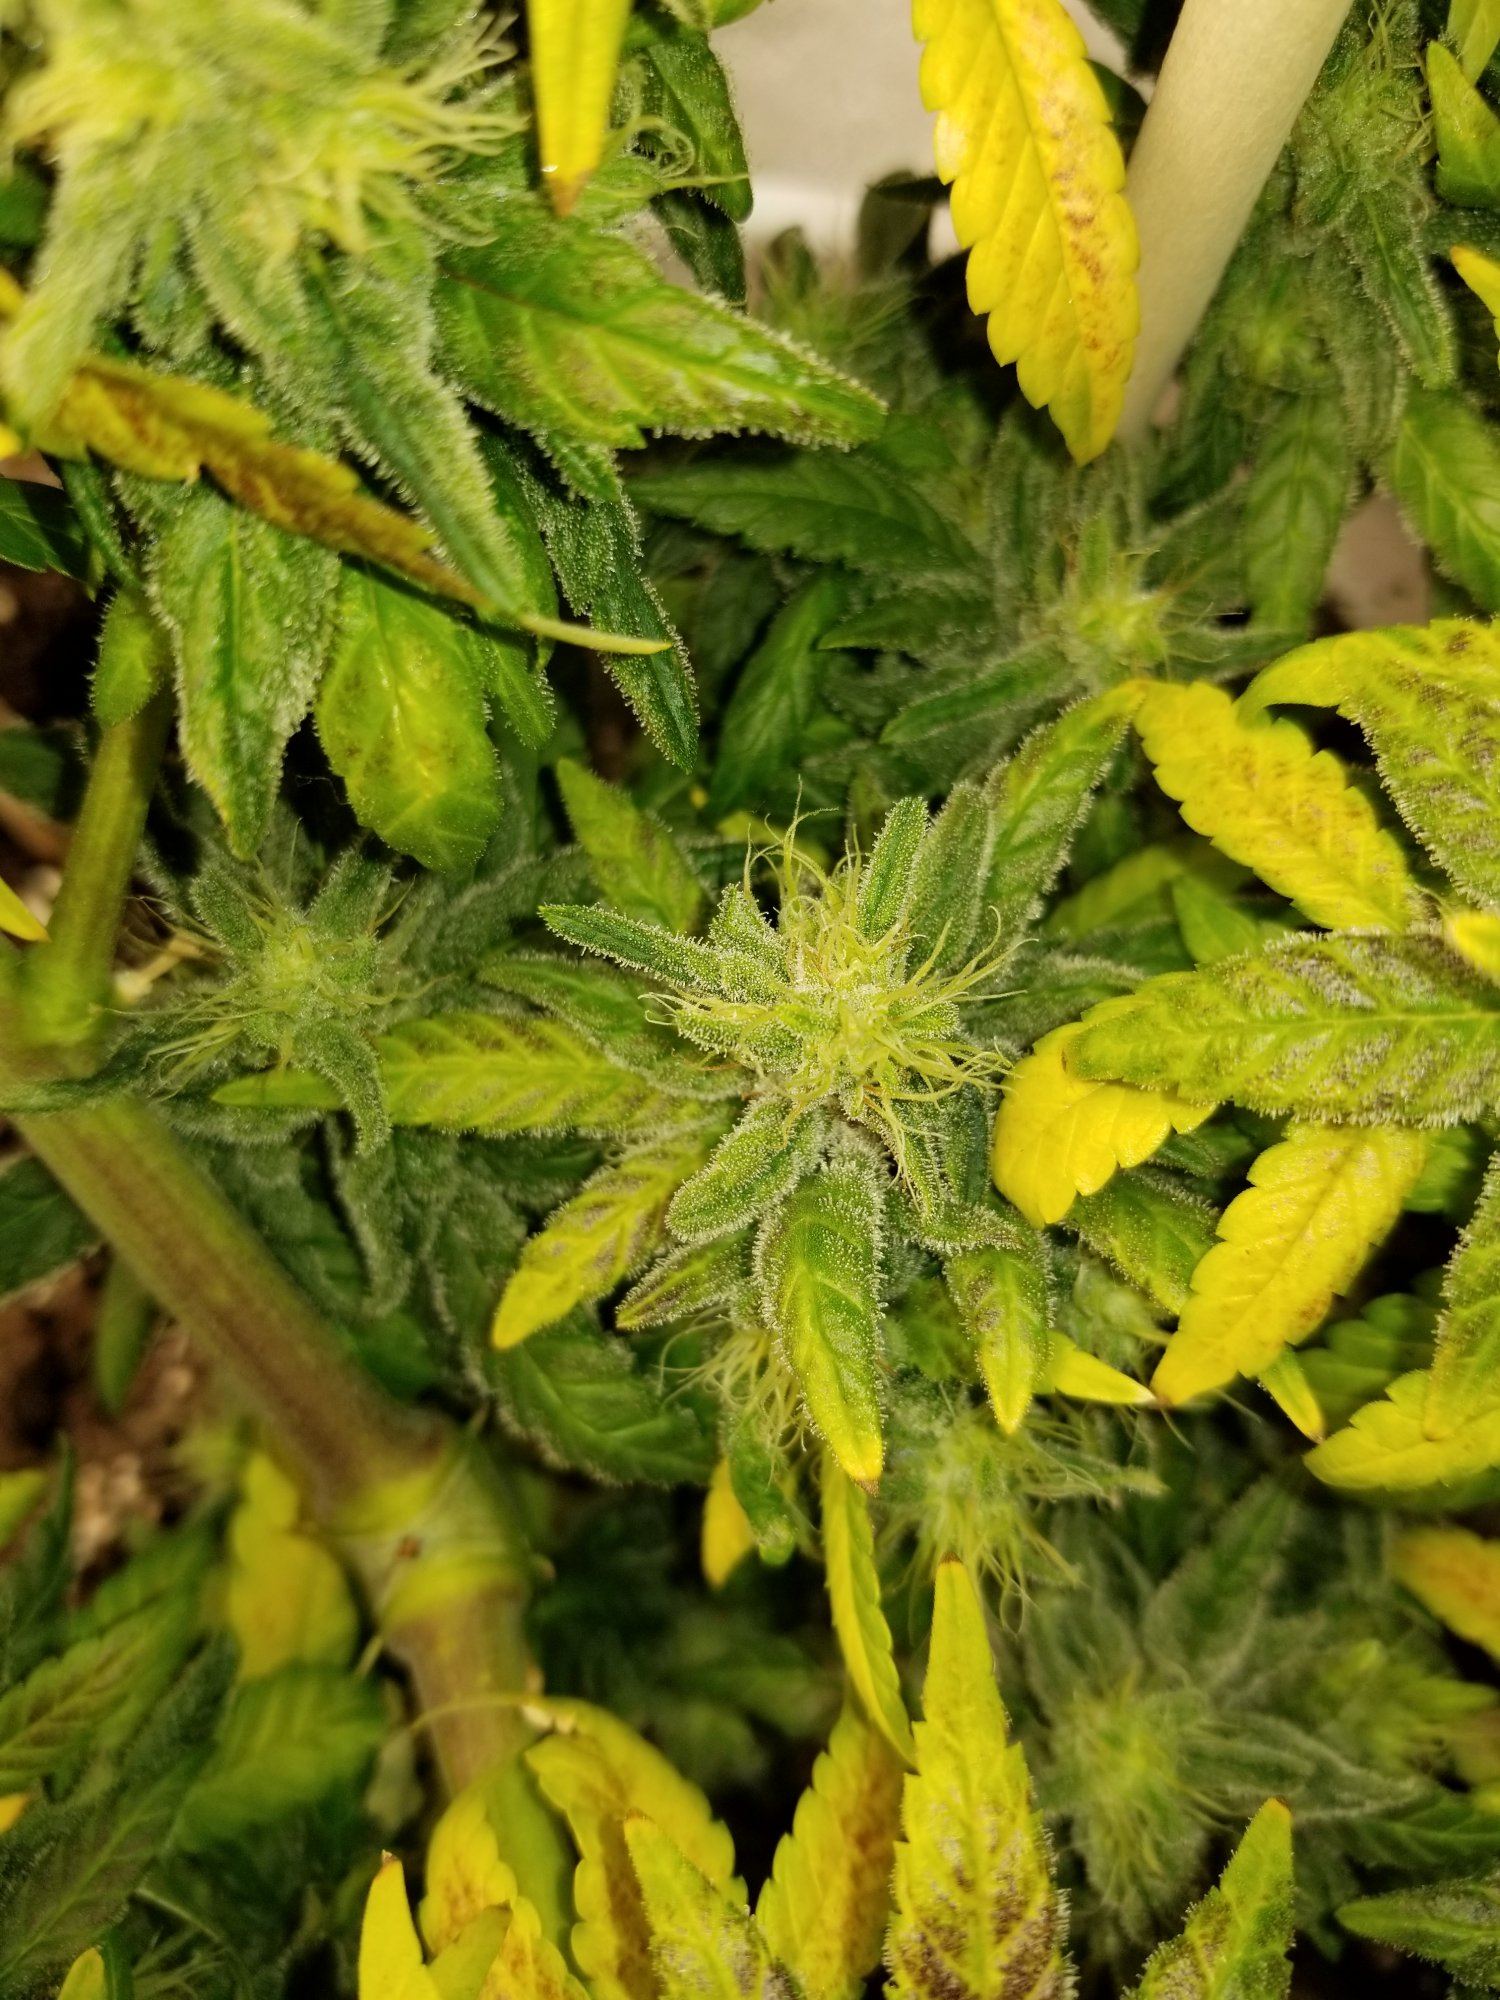 Unknown strain producing genetic foxtails 6